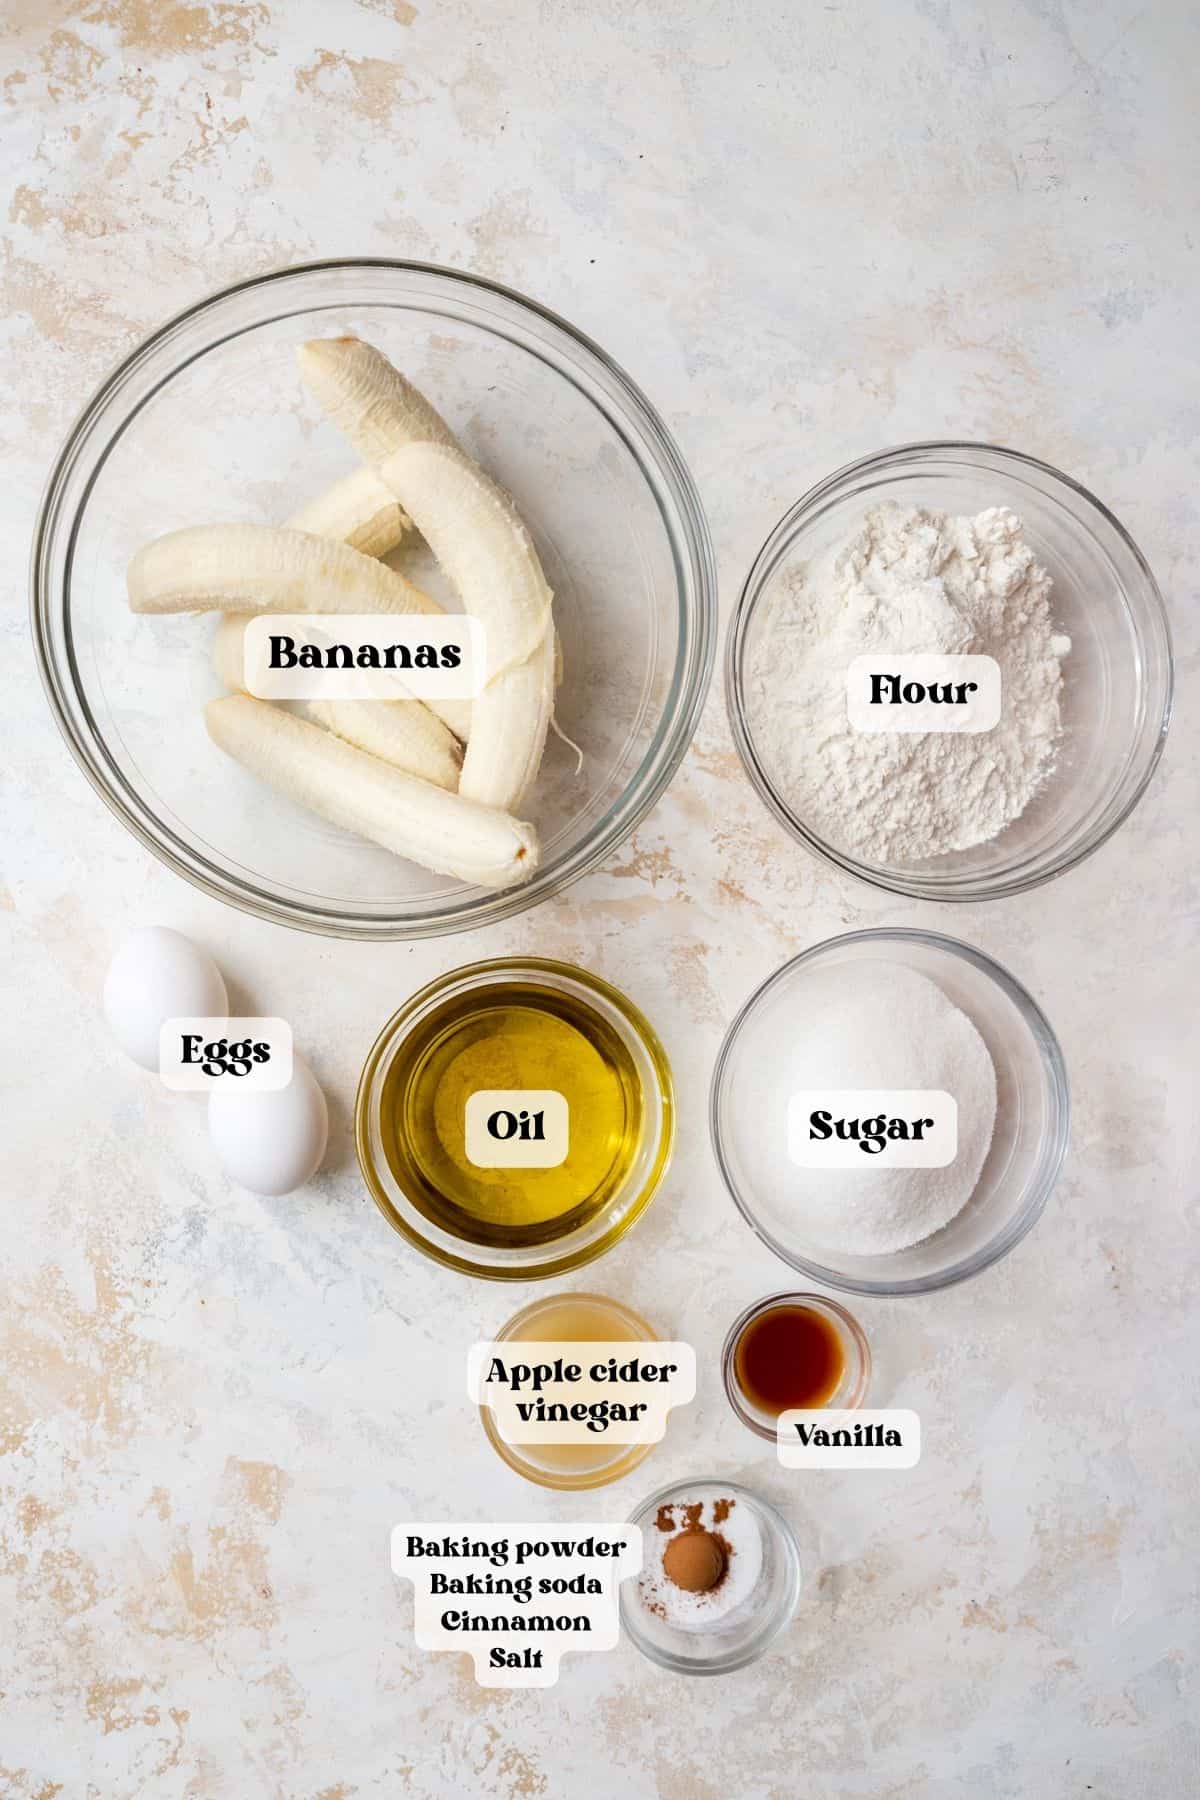 Ingredients to make banana bread on a white surface.